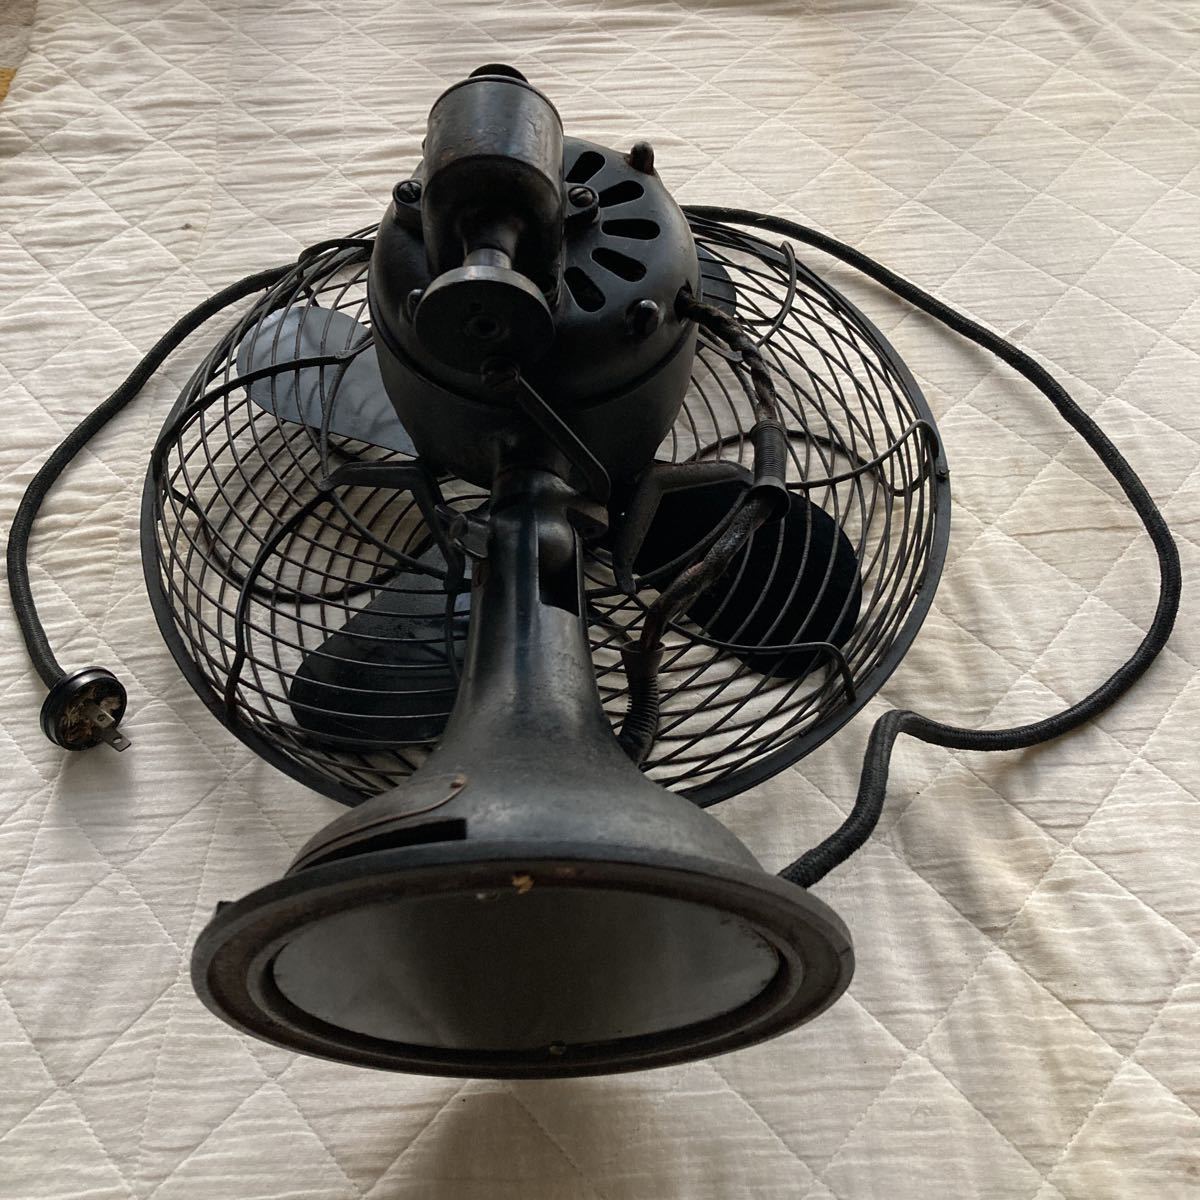  Taisho. the first period era. retro four sheets wings root. Shibaura electric. electric fan material is brass made. color is black. that time thing. all original. completion goods. operation goods. electric fan. under. width. approximately 17.7 cm.